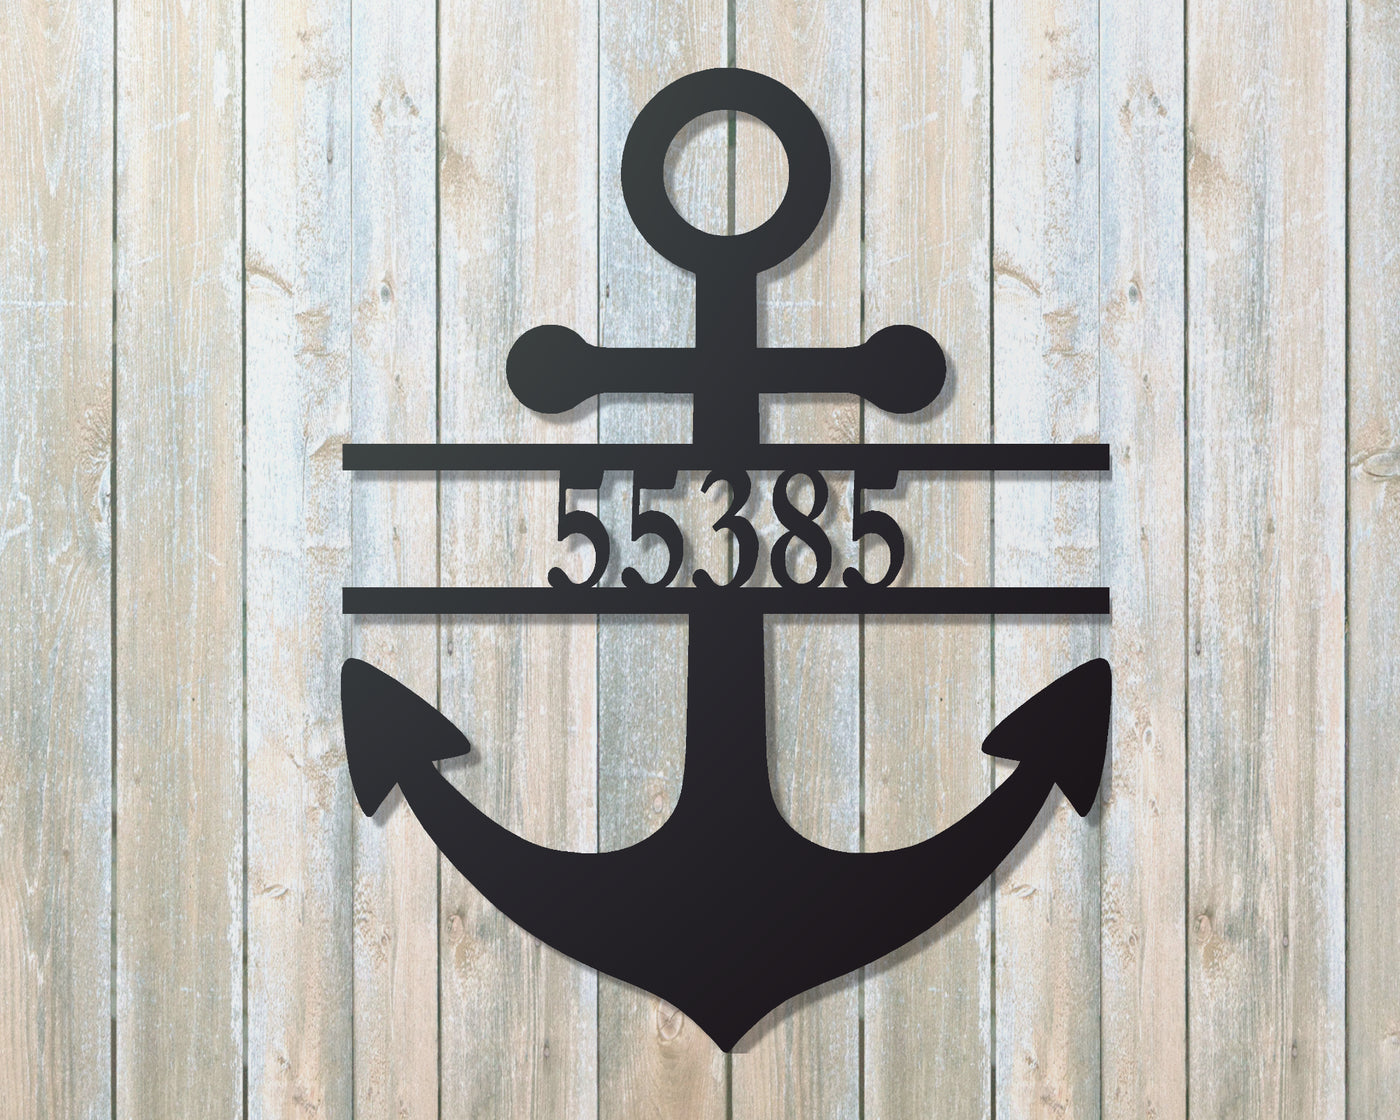 Personalized Anchor Metal Sign with Name or Street Address Numbers - Madison Iron and Wood - Personalized sign - metal outdoor decor - Steel deocrations - american made products - veteran owned business products - fencing decorations - fencing supplies - custom wall decorations - personalized wall signs - steel - decorative post caps - steel post caps - metal post caps - brackets - structural brackets - home improvement - easter - easter decorations - easter gift - easter yard decor